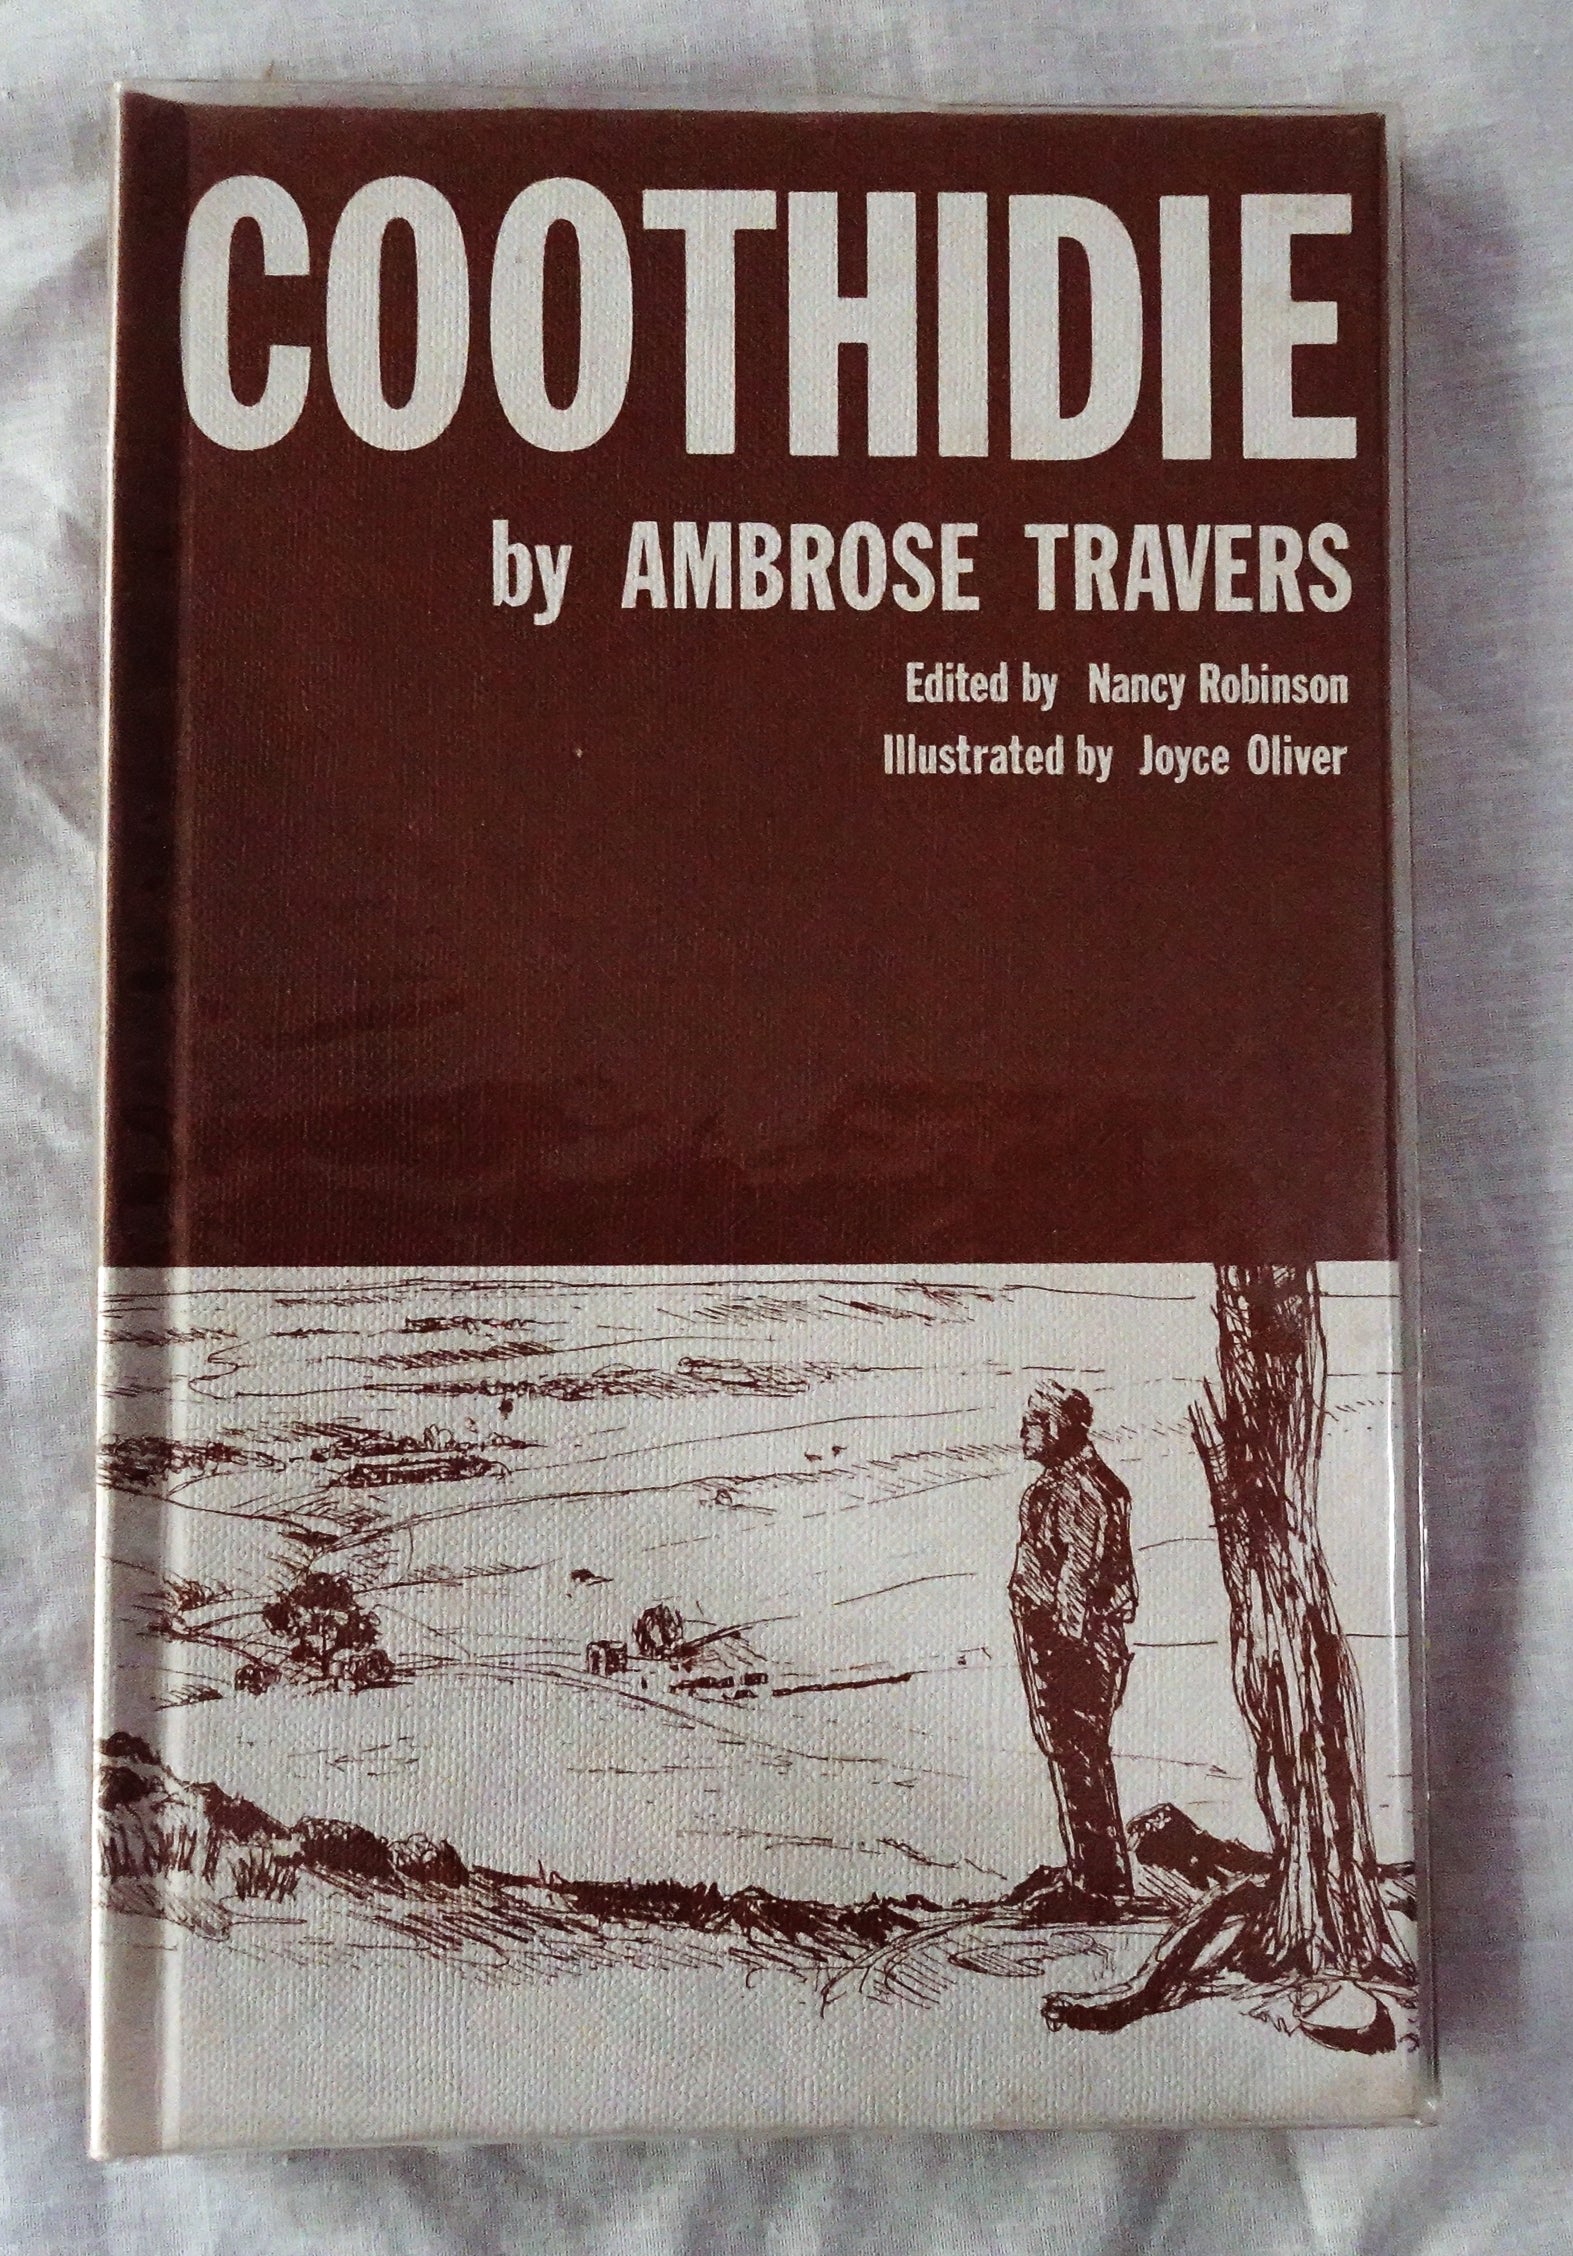 Coothidie  by Ambrose Travers  Edited by Nancy Robinson  Illustrated by Joyce Oliver